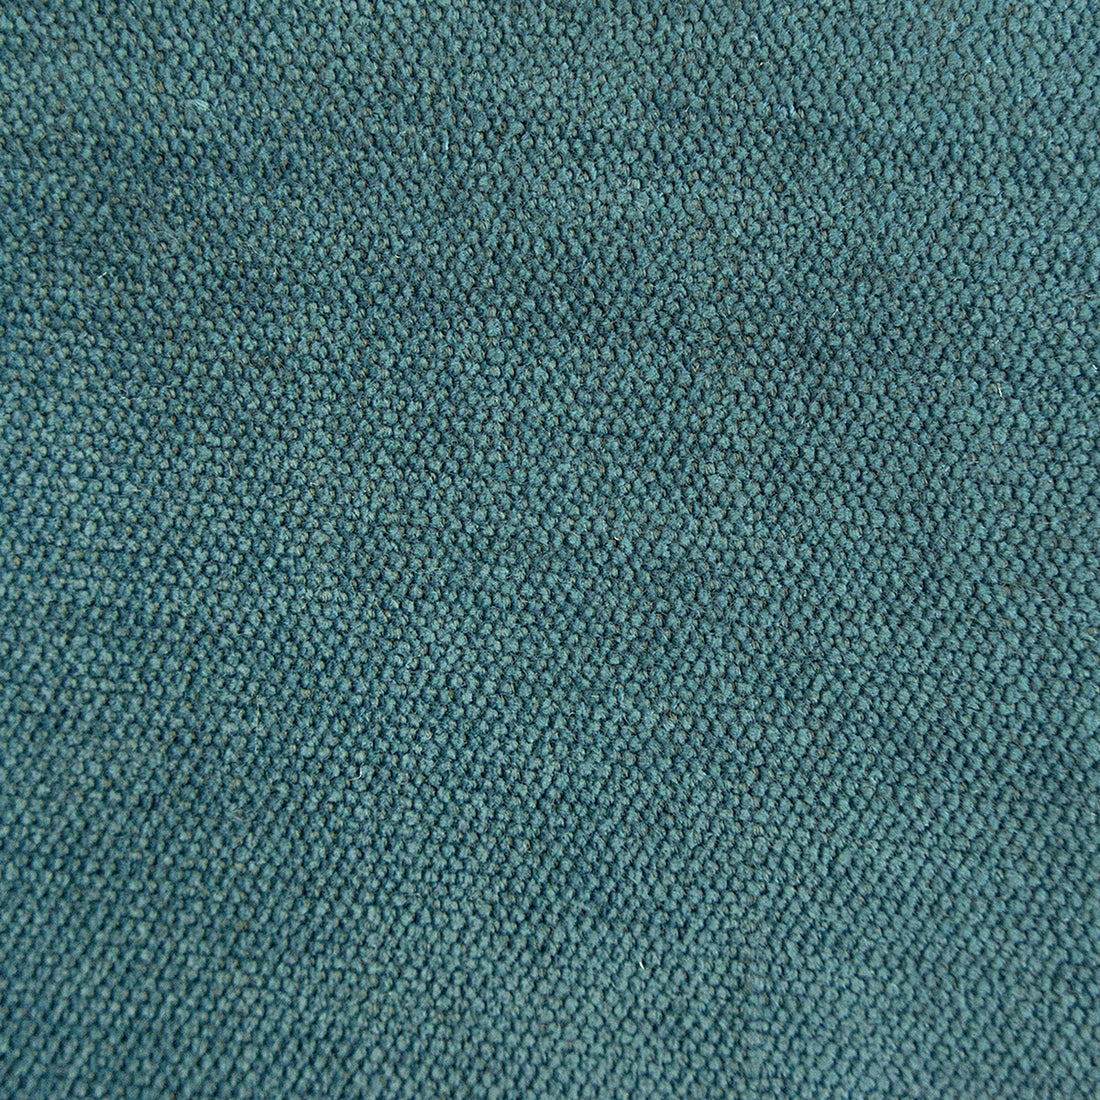 Fuu fabric in oceano color - pattern GDT5631.011.0 - by Gaston y Daniela in the Gaston Japon collection